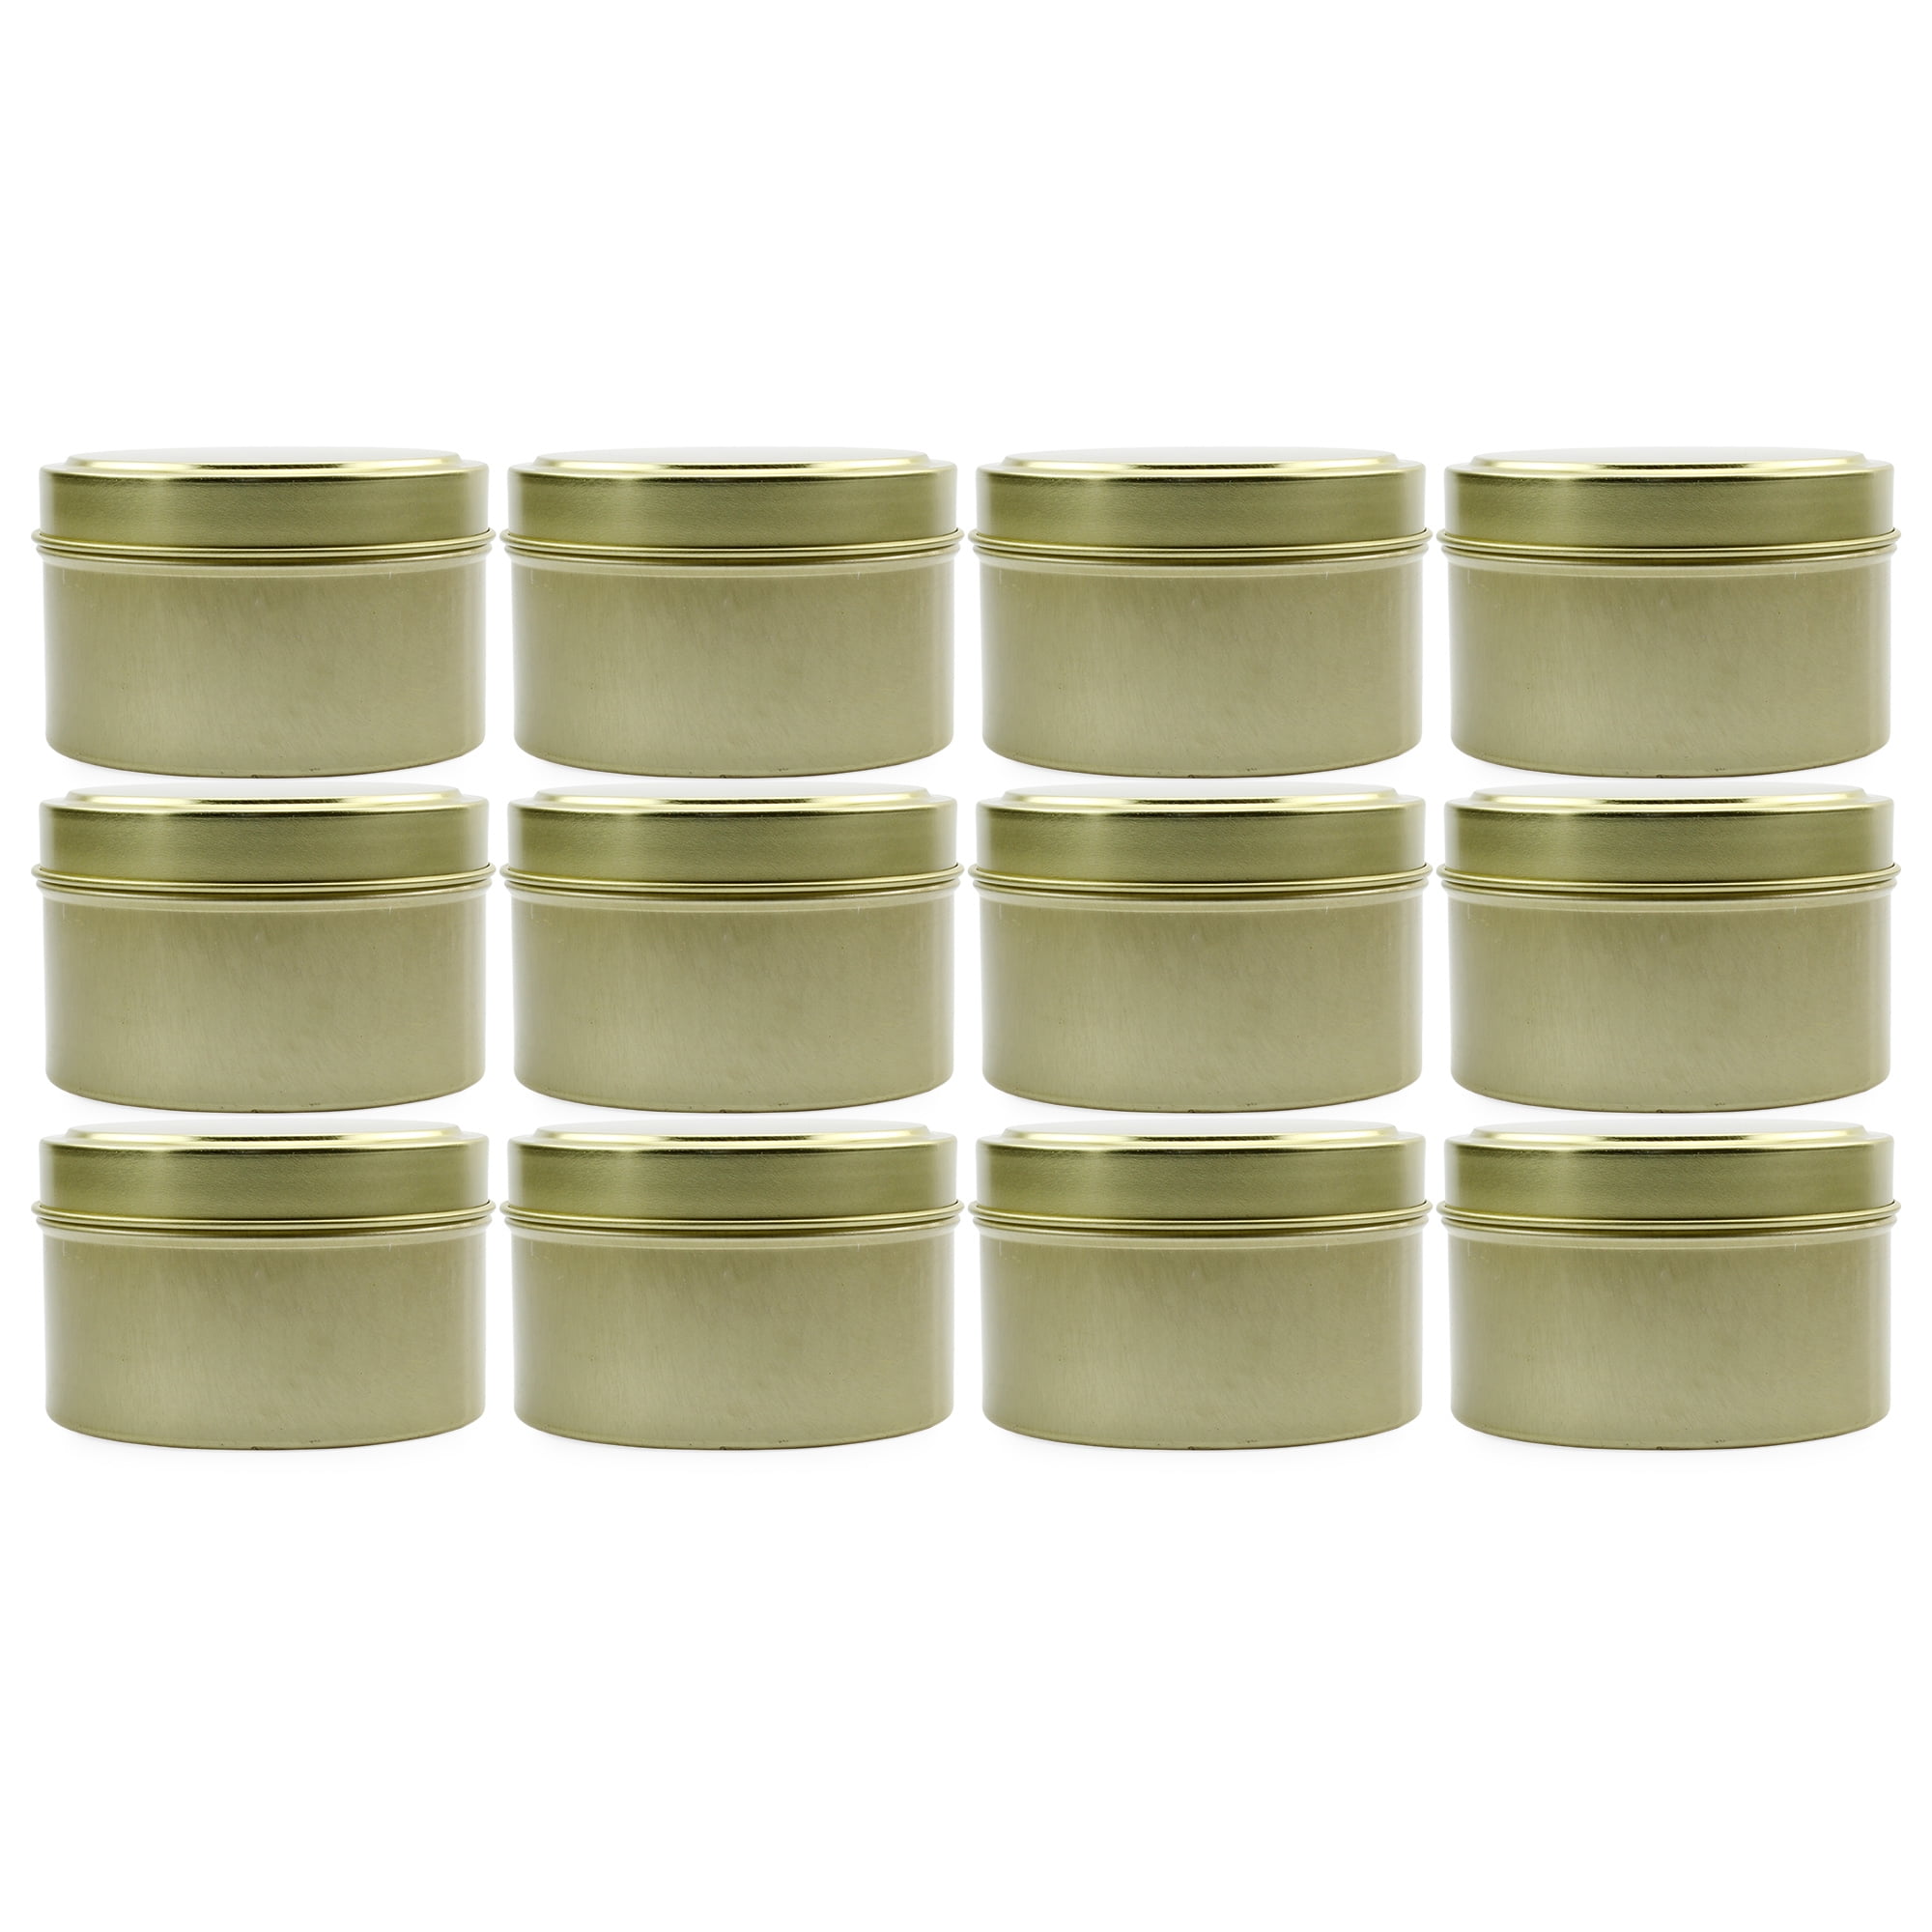 Cornucopia 2oz Metal Tins/Candle Tins (24-Pack); Tiny Round Metal  Containers with Slip-On Lids for Party Favors, Candle Making, Spices & Gifts